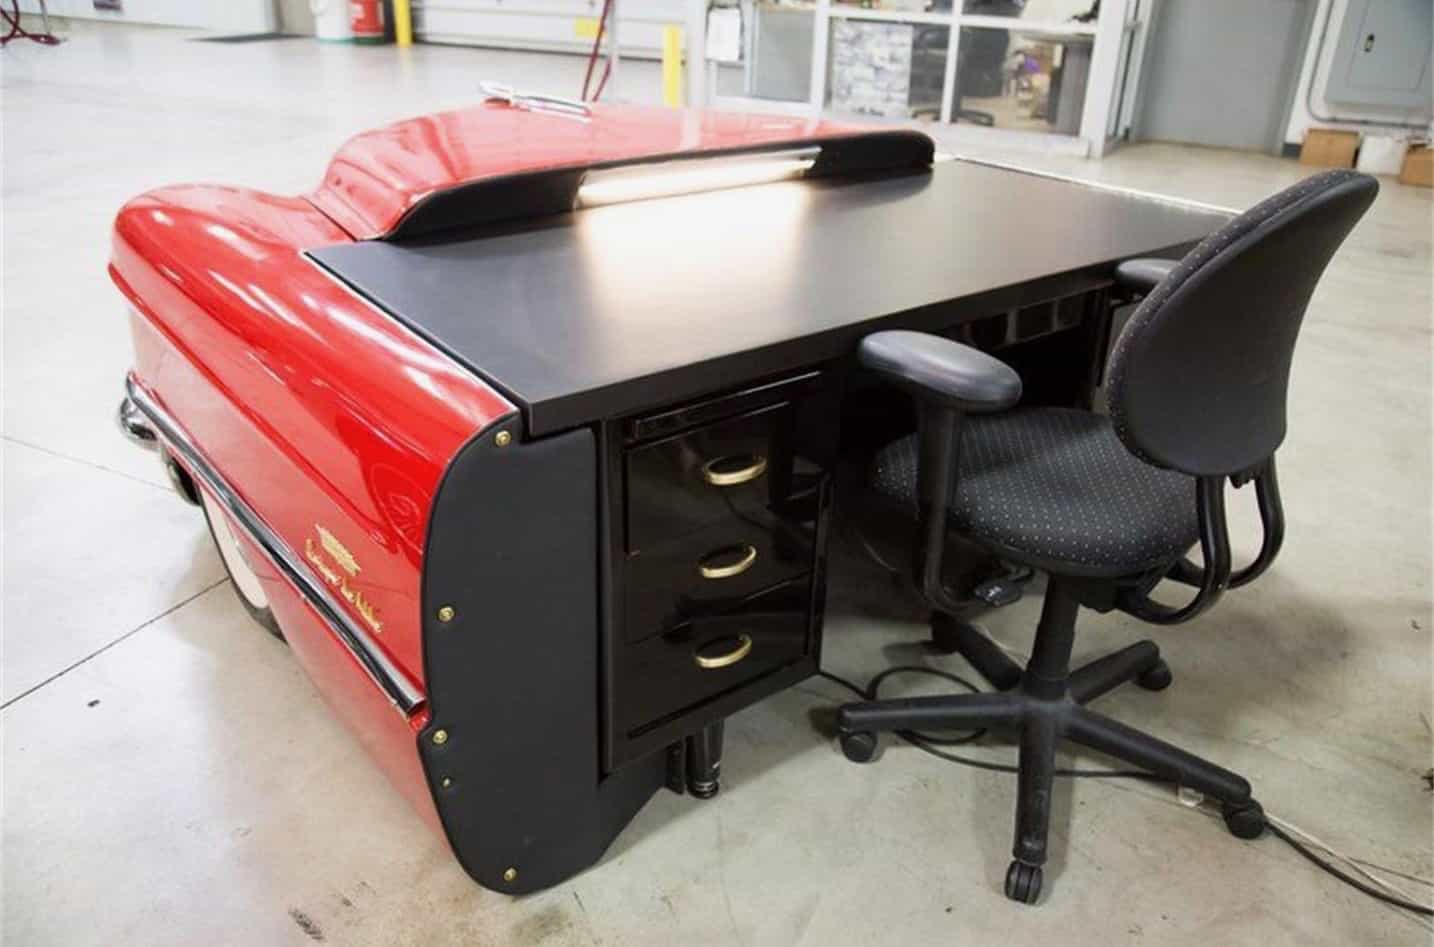 Cadillac desk, This Caddy is designed for office use, ClassicCars.com Journal